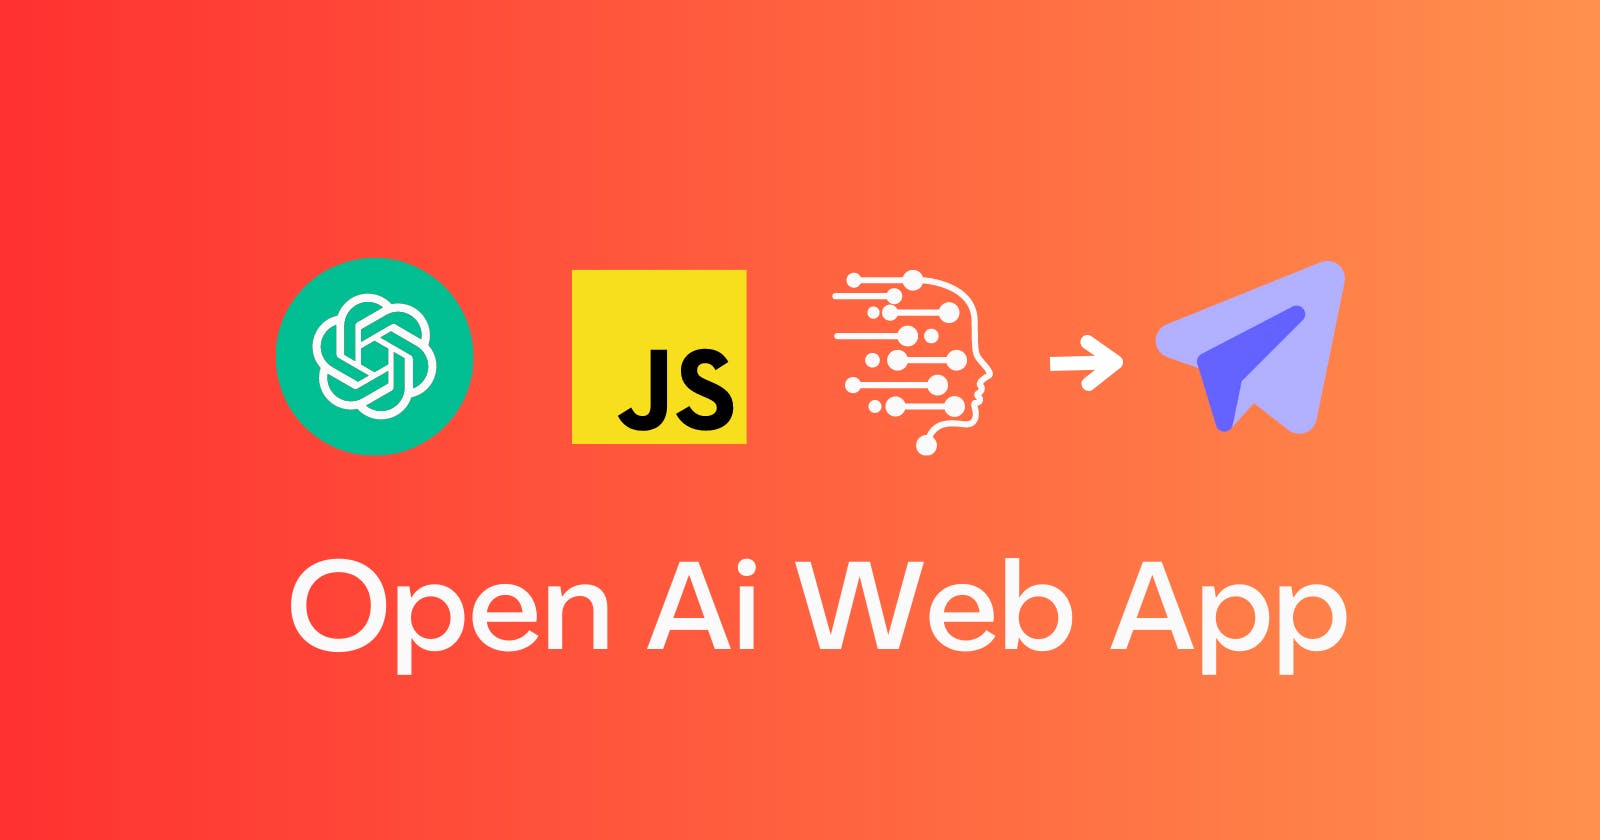 Get Started With Open AI Web App Development